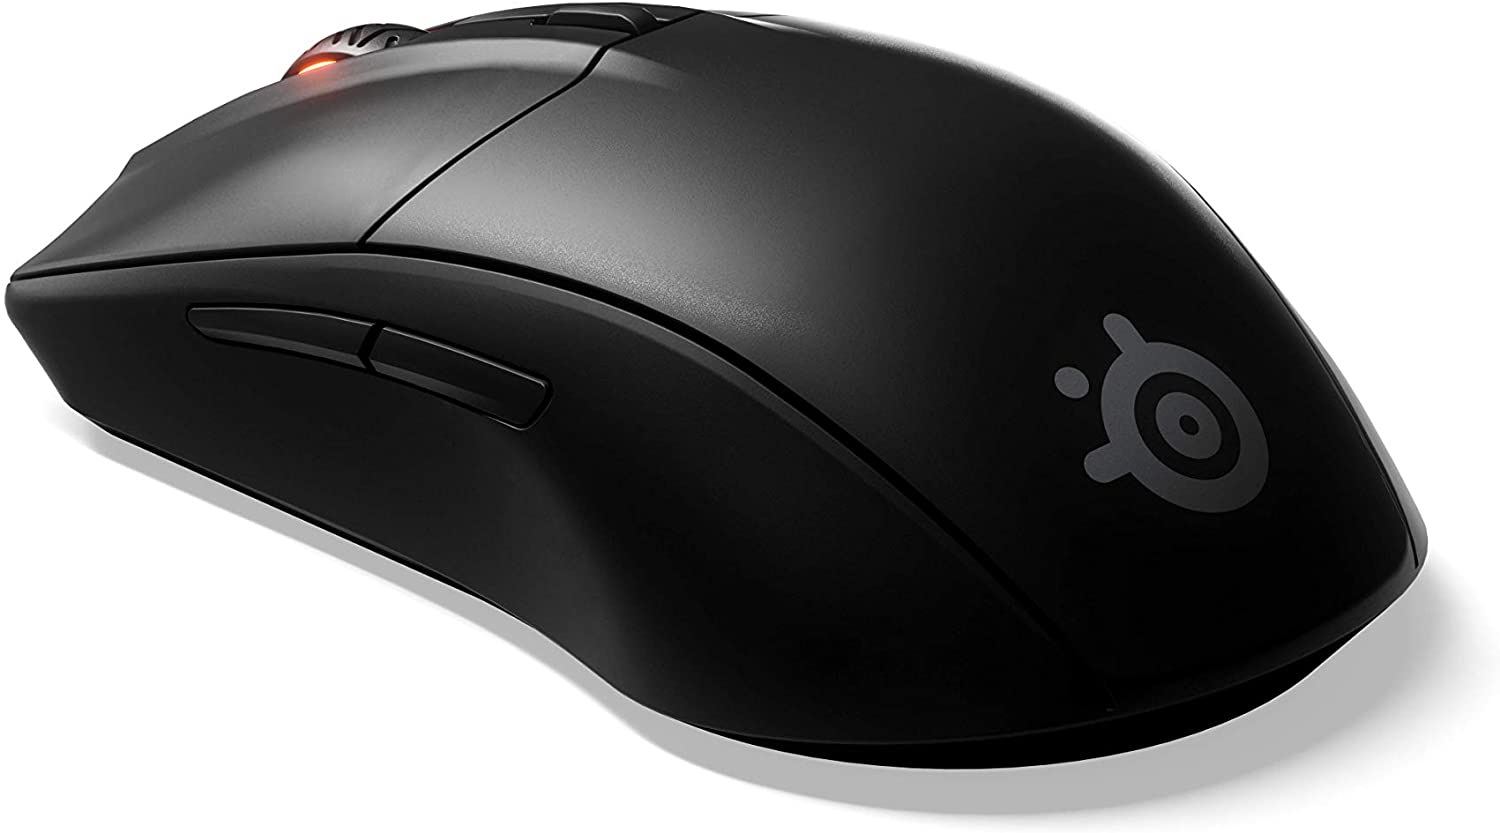 50%off SteelSeries Rival 3 Wireless Gaming Mouse $24.85 at Amazon